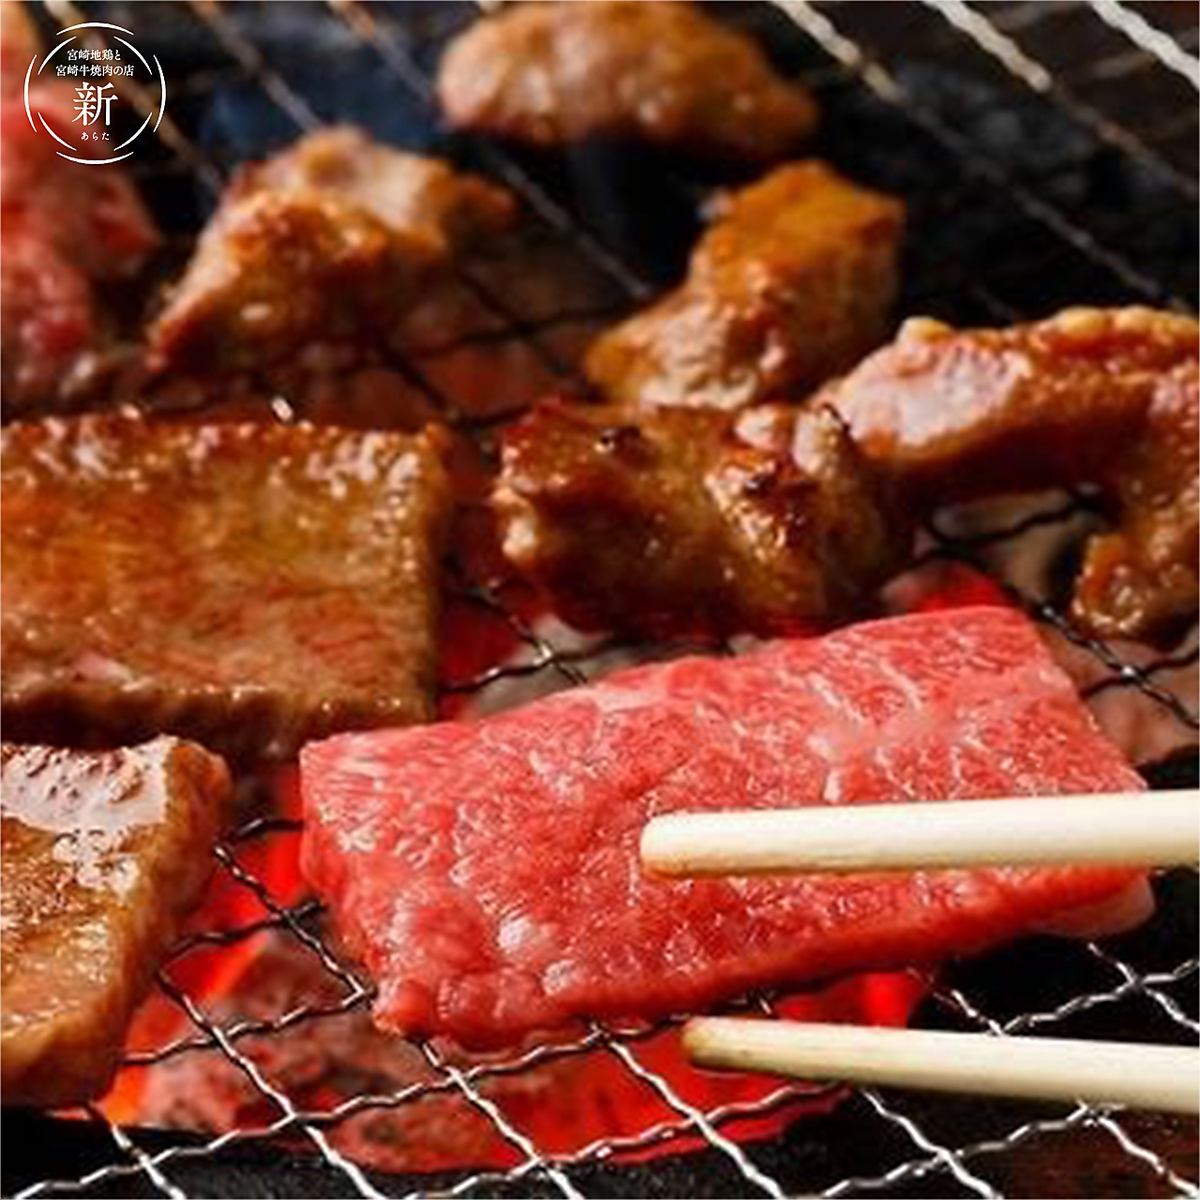 All seats are private! A stylish and luxurious yakiniku restaurant where you can compare different brand beef such as Miyazaki beef and Kagoshima black beef.